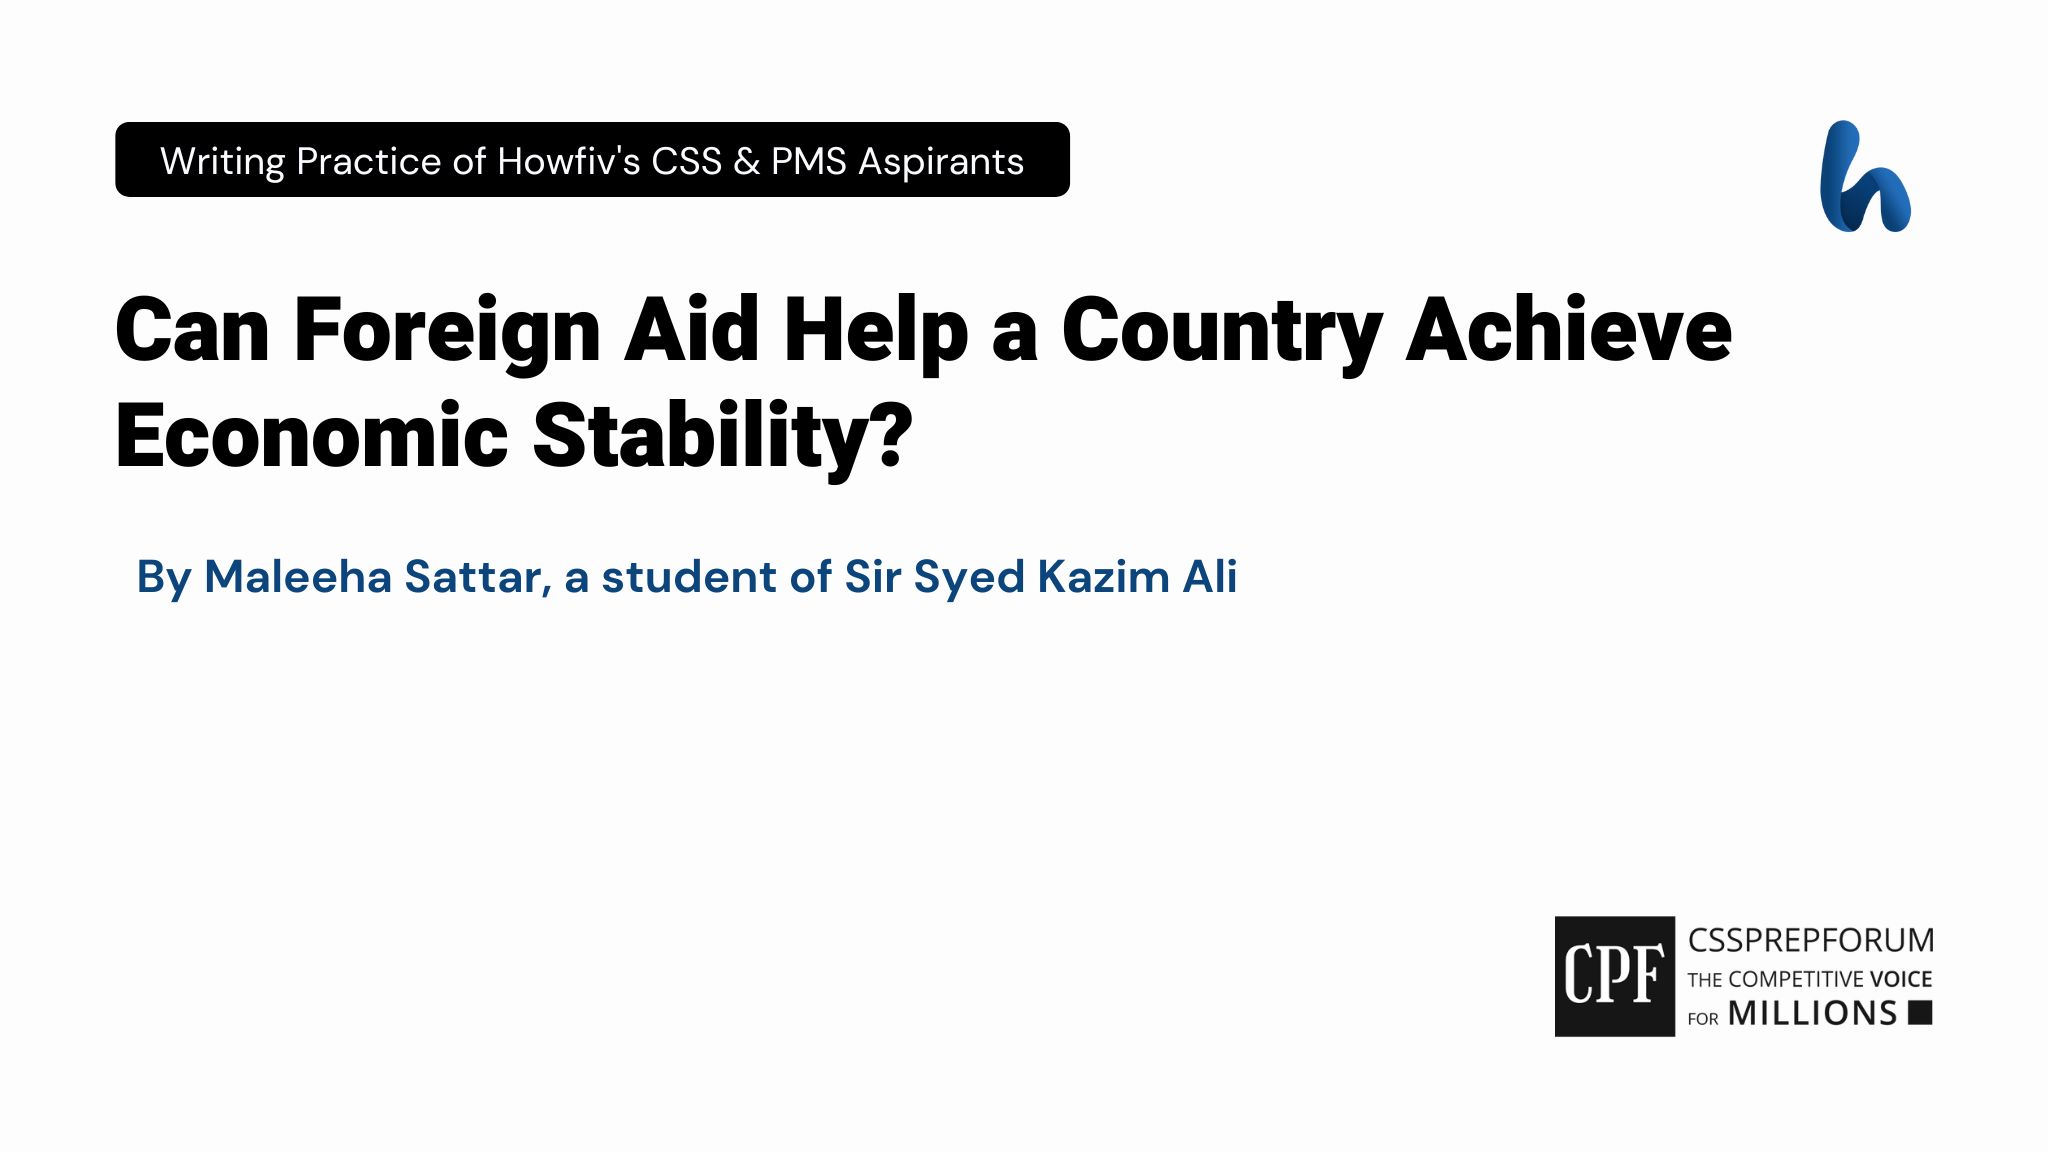 Can Foreign Aid Help a Country Achieve Economic Stability?